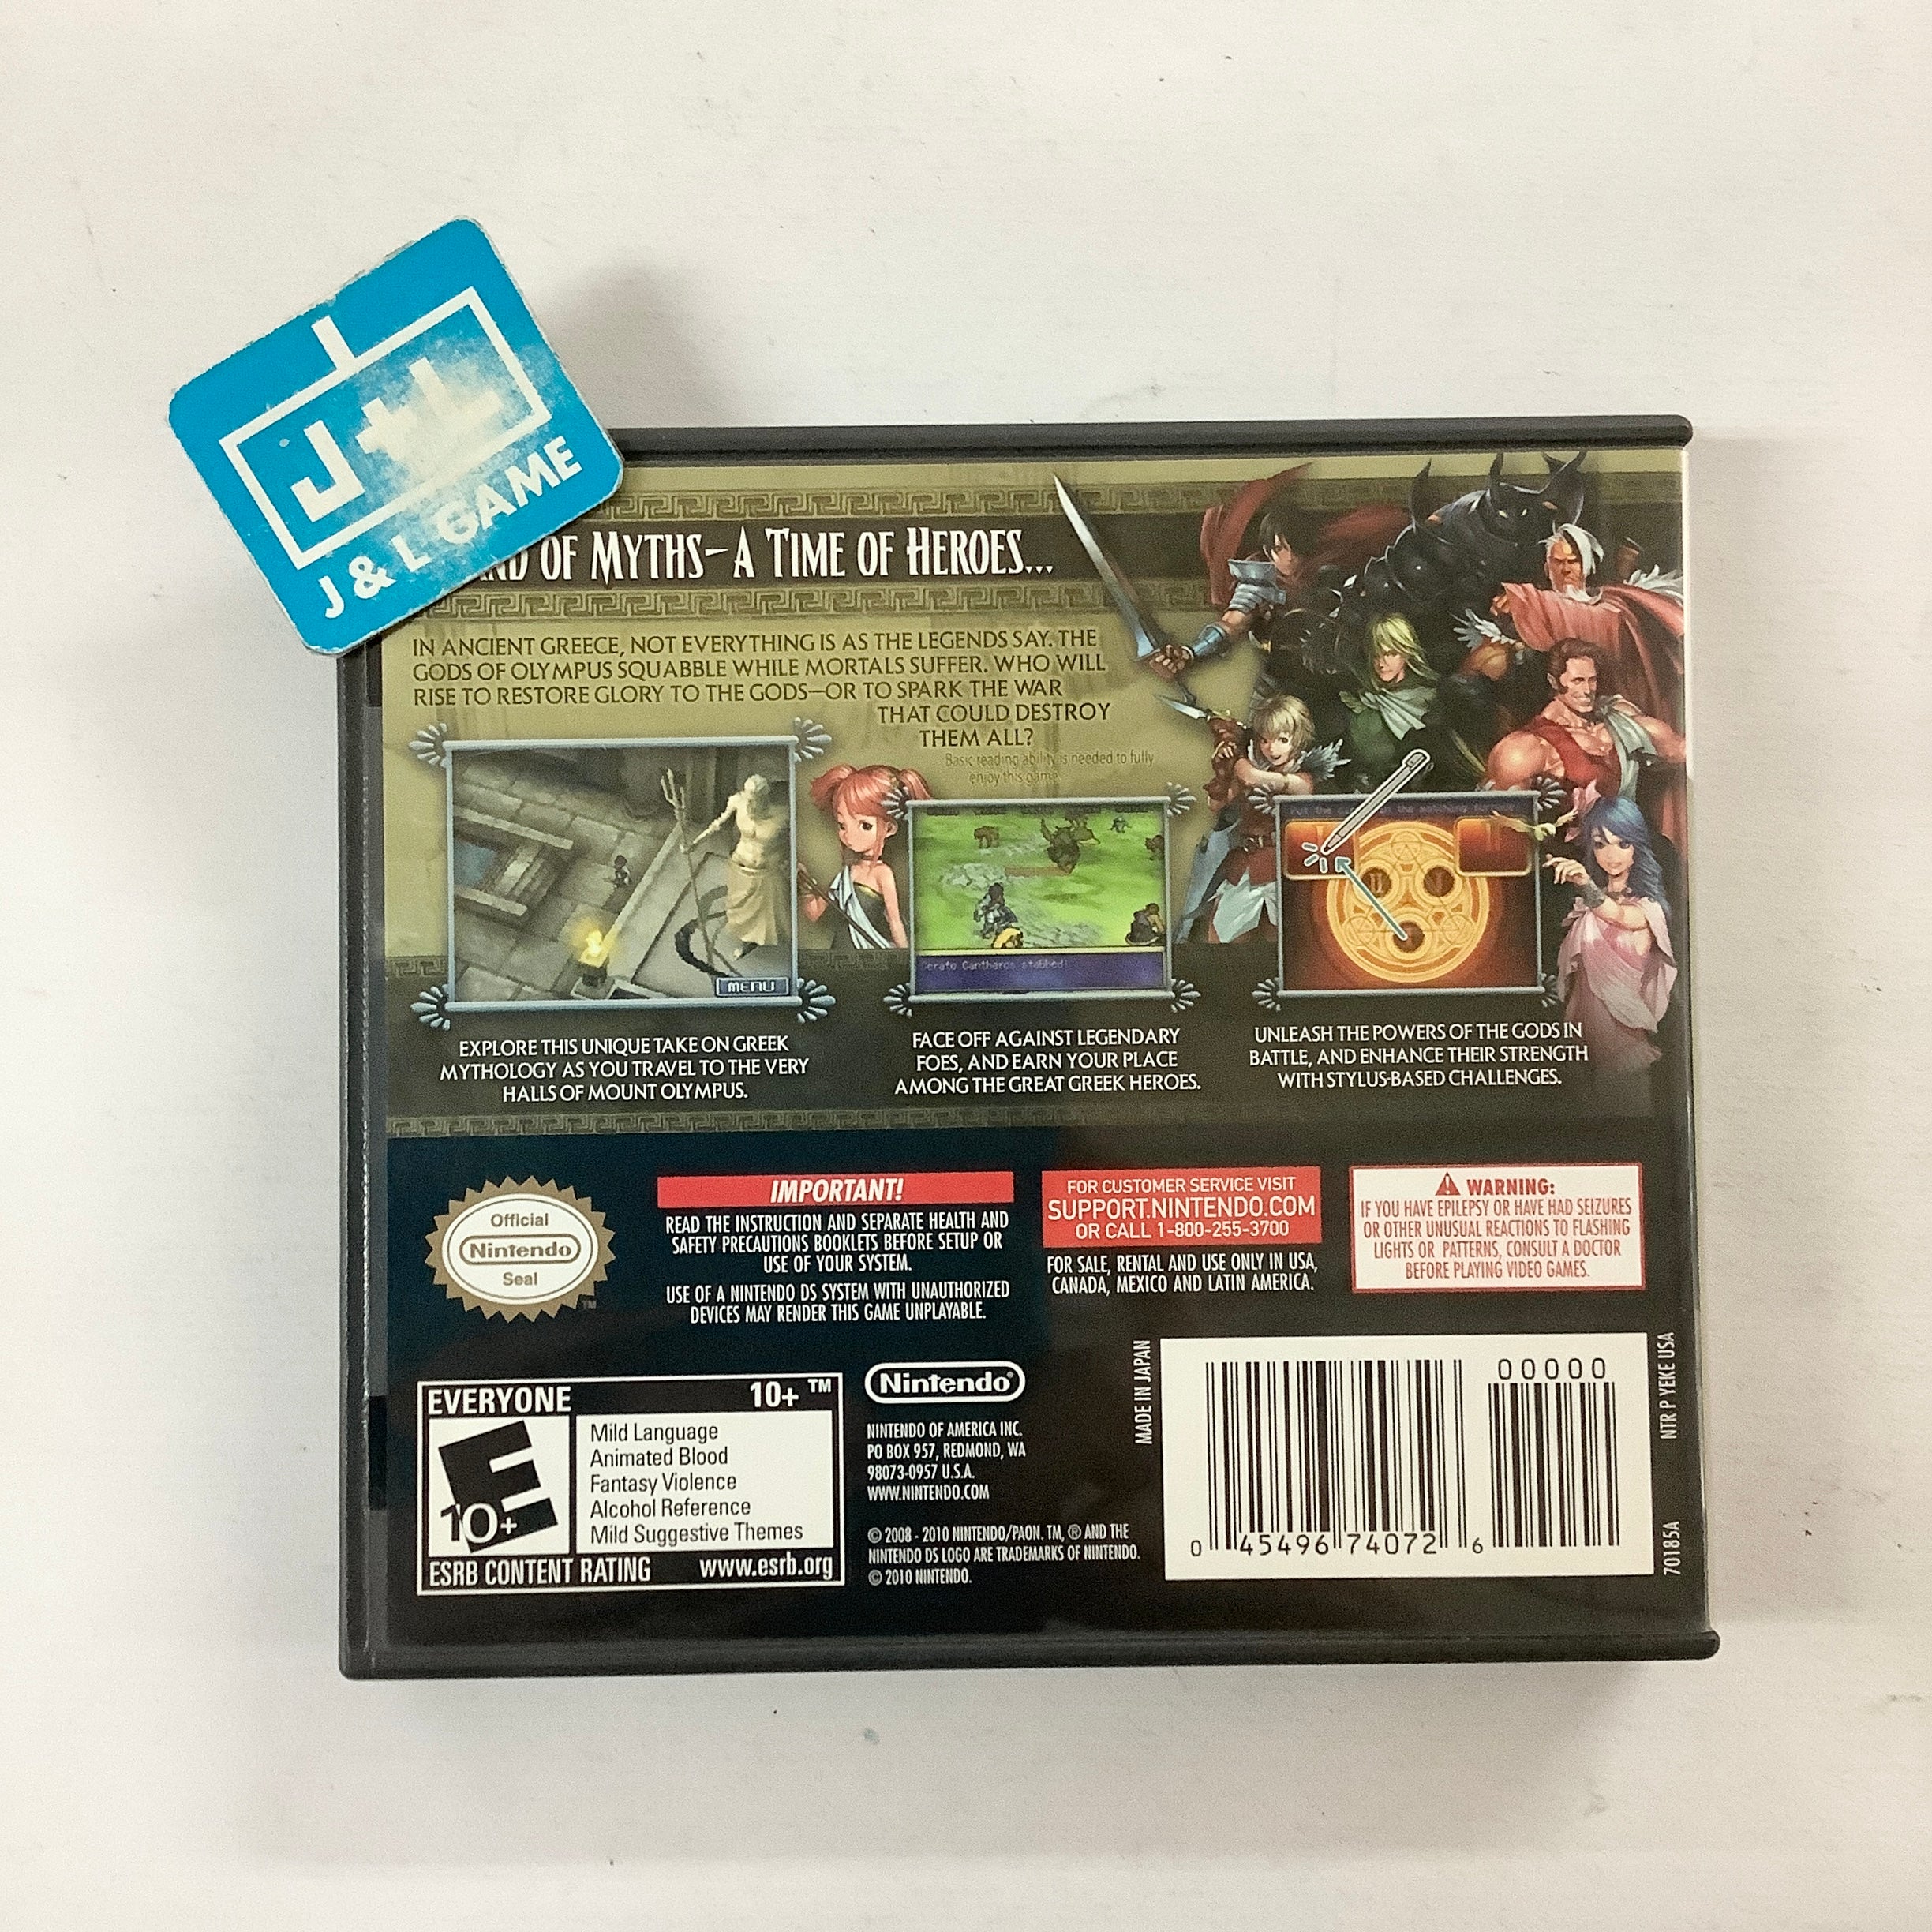 Glory of Heracles - (NDS) Nintendo DS [Pre-Owned] Video Games Nintendo   